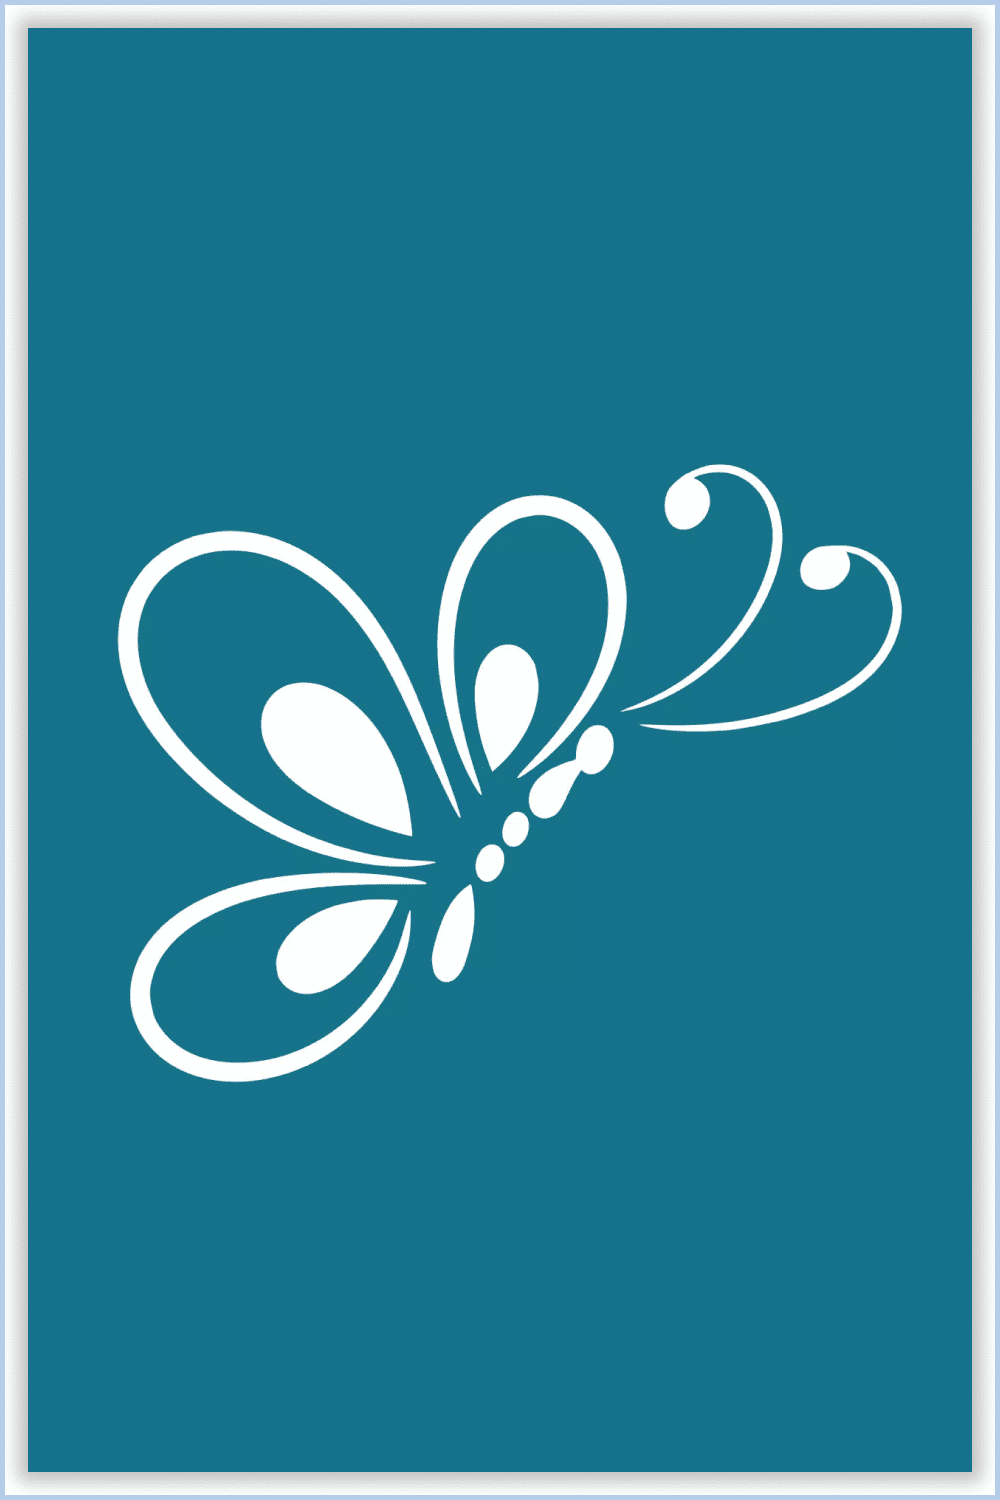 Stylized silhouette of a butterfly from the side on a blue background.